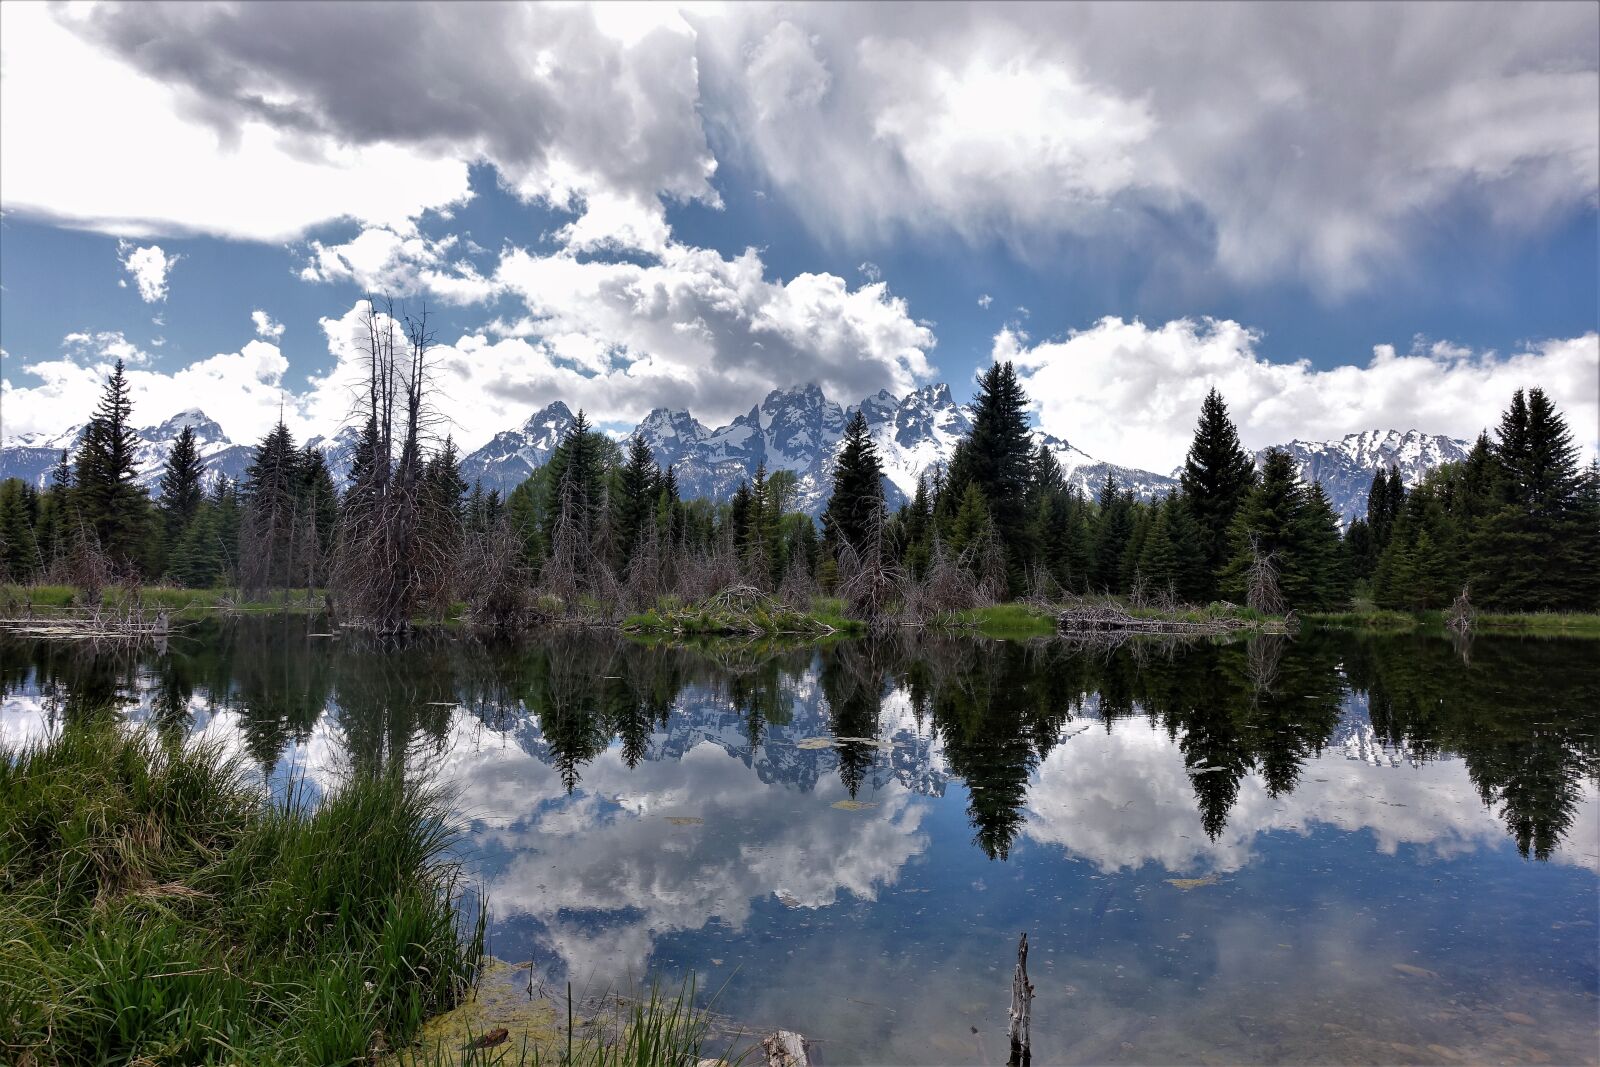 Sony Cyber-shot DSC-RX100 III sample photo. Reflections, wyoming, hiking photography